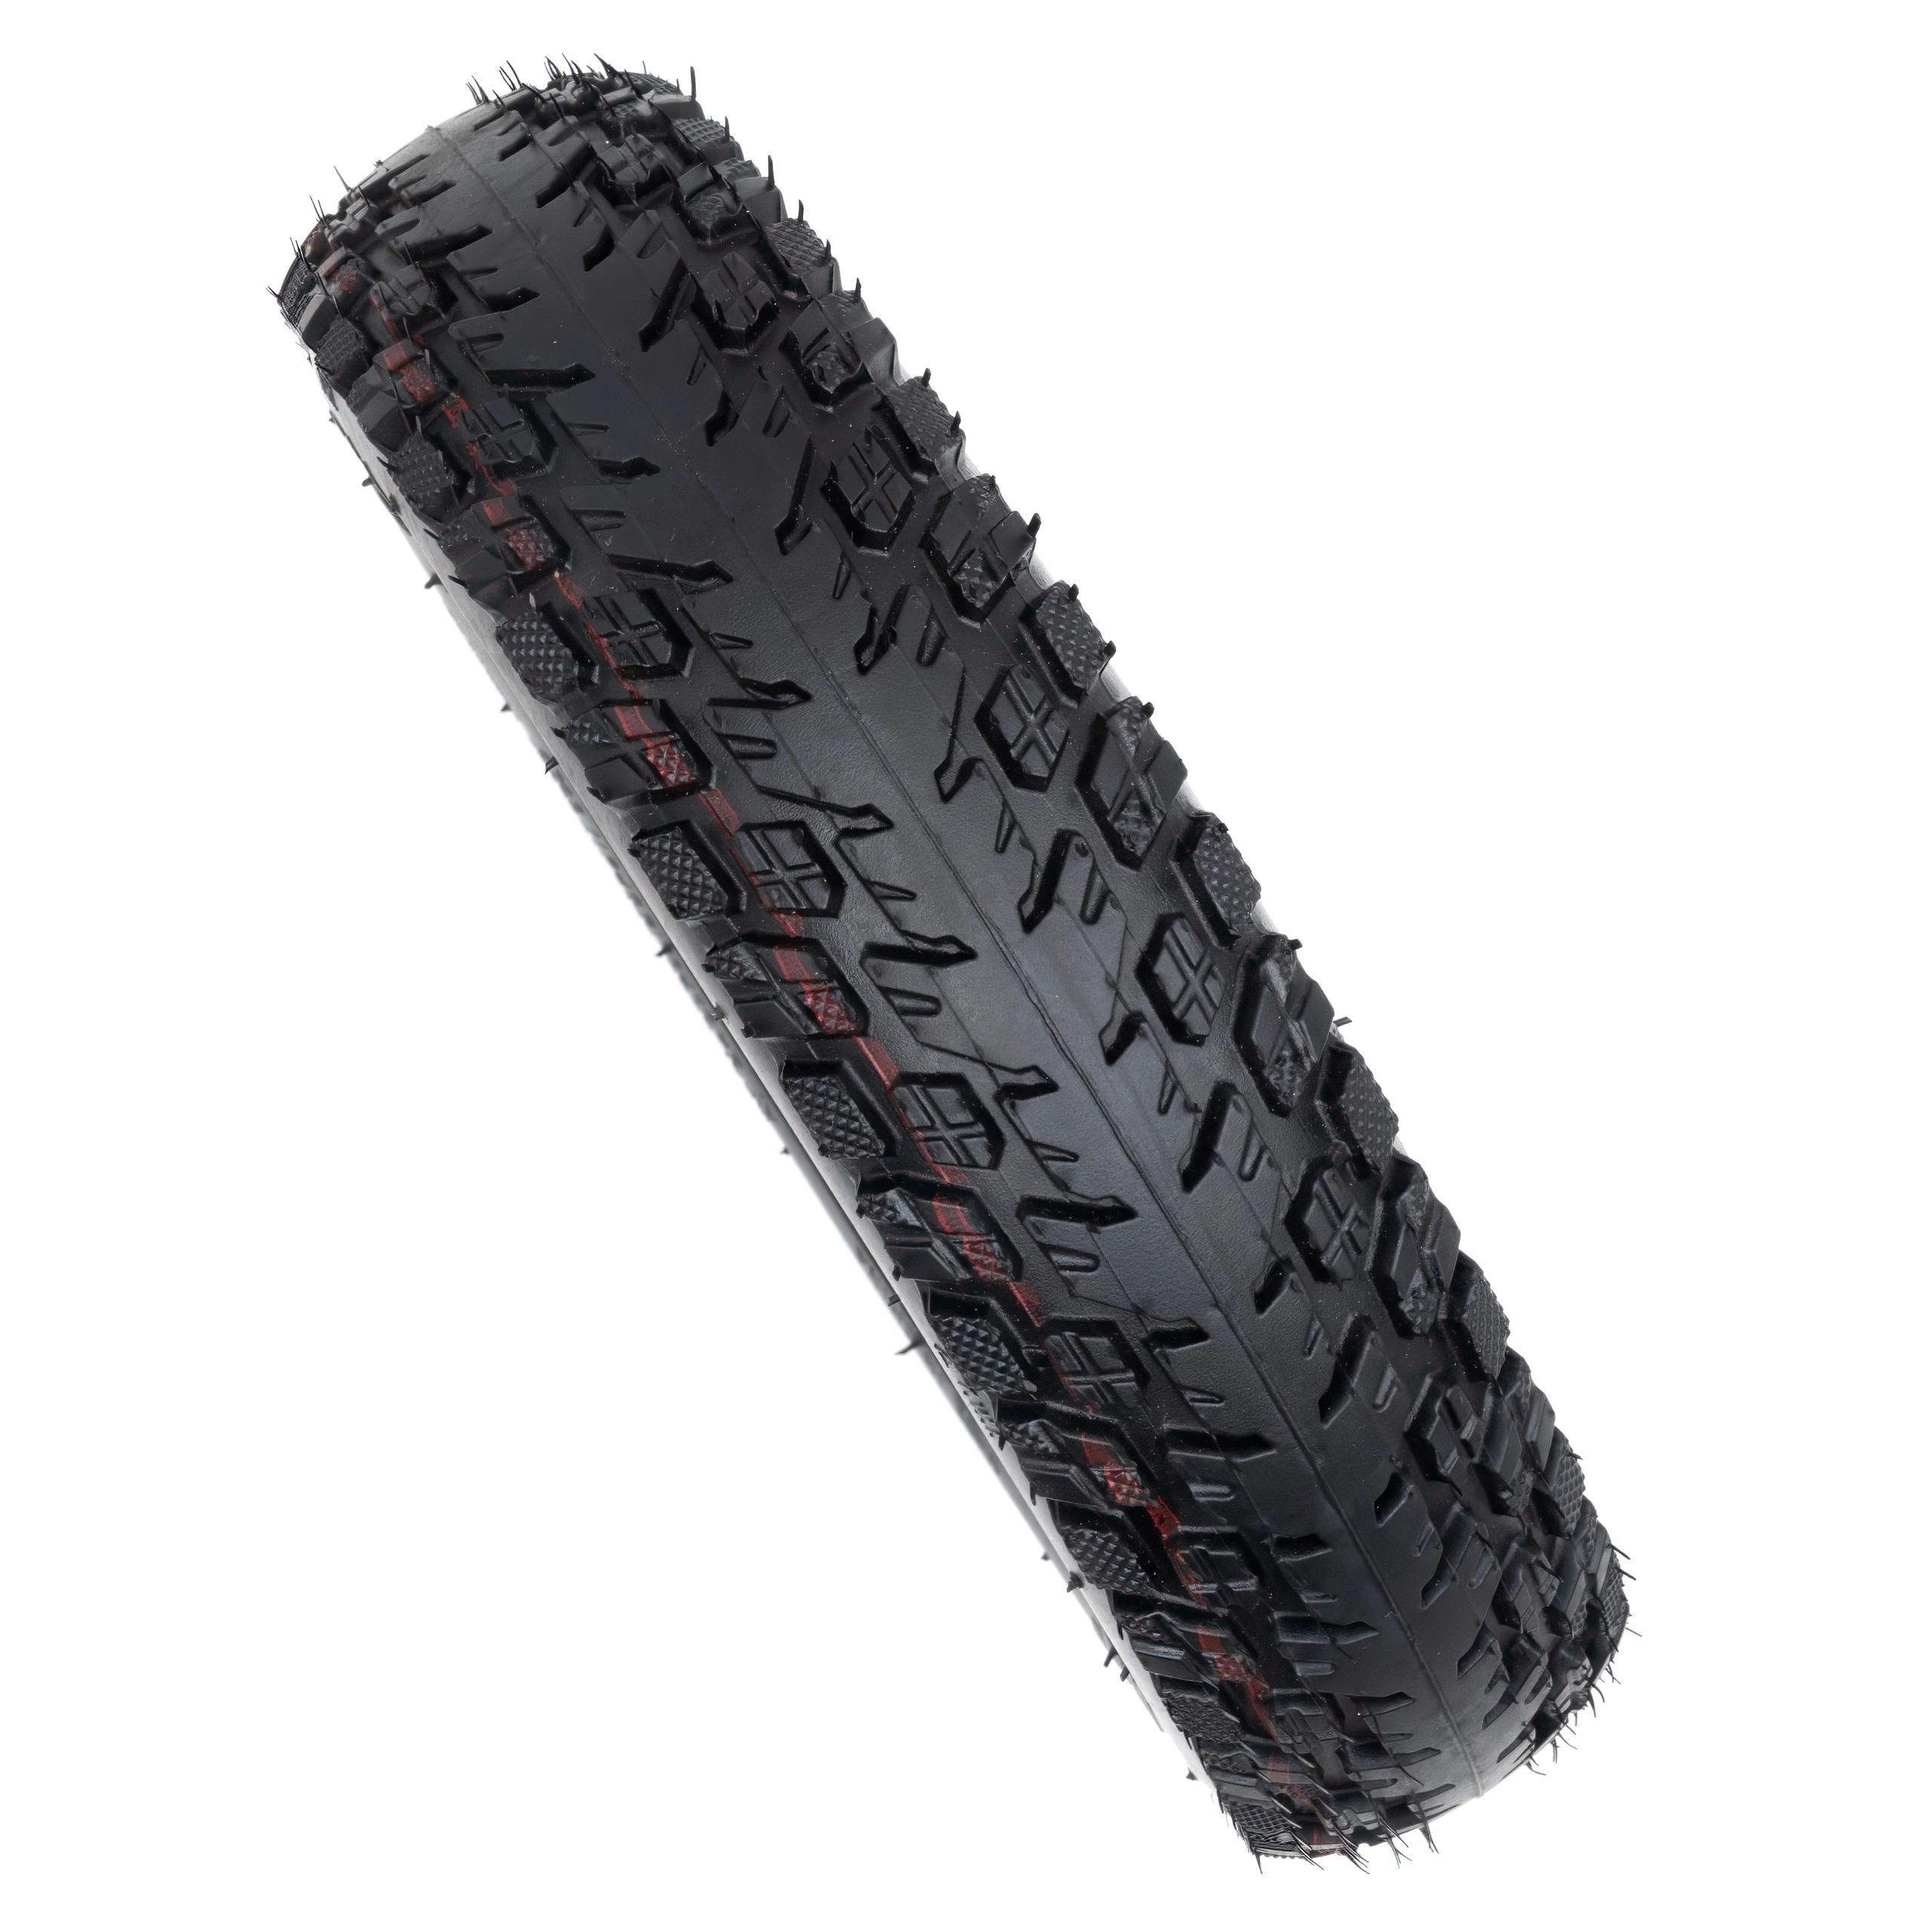 10 Inch 10x2 Off-Road Tubeless Tire for Xiaomi M365/Pro/Pro2/1S